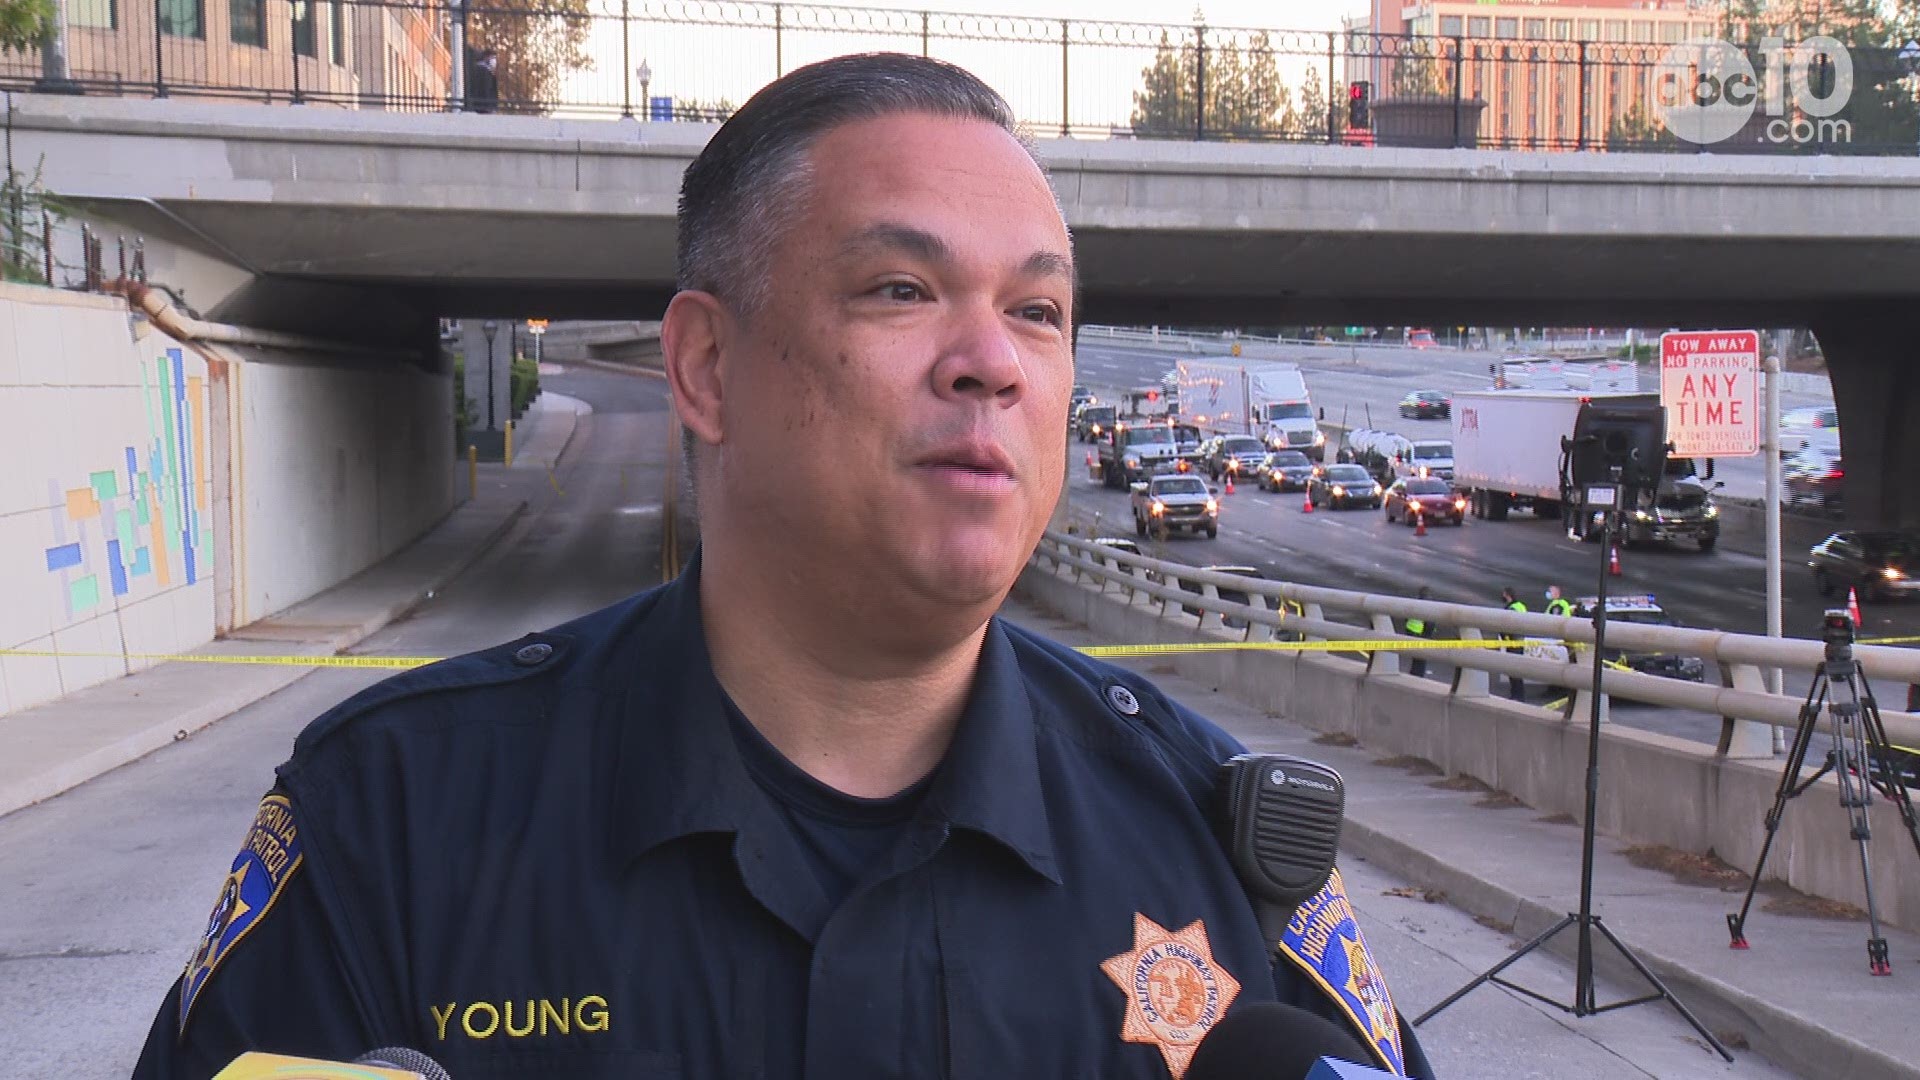 California Highway Patrol gives an update on its investigation after a man was found shot and killed on I-5 in Sacramento | RAW